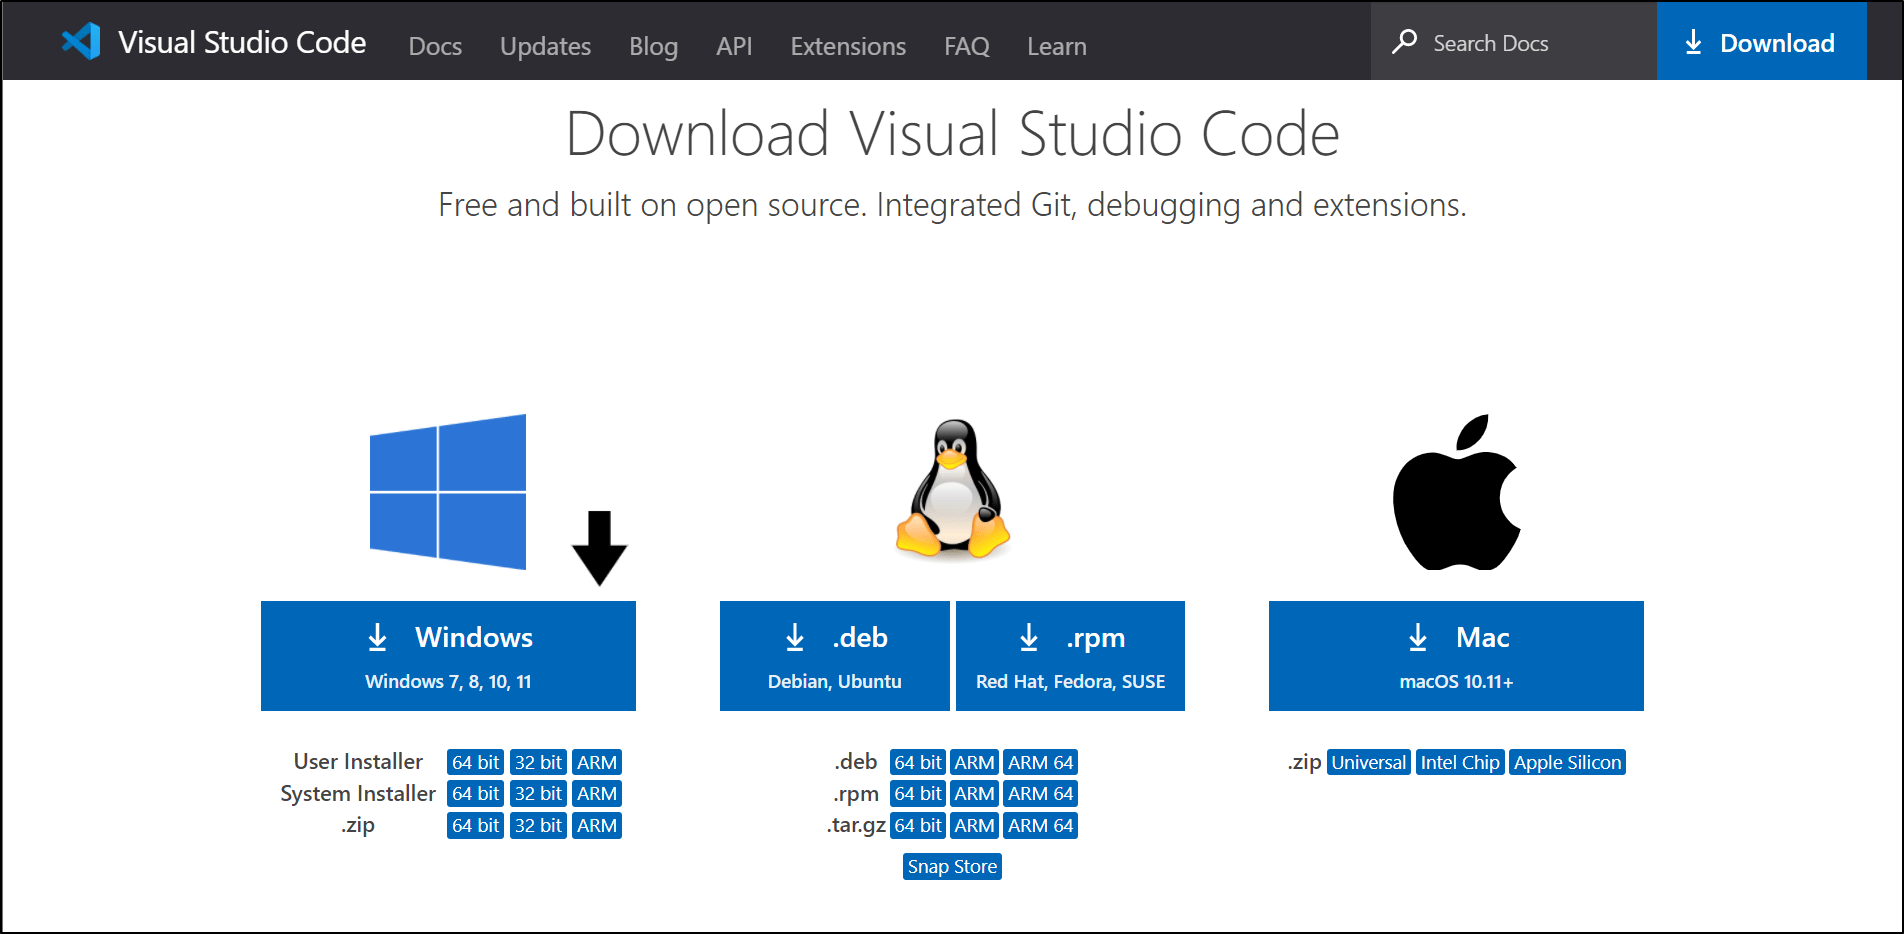 downloading Visual Studio Code installation file from official downloads page to reinstall it on Windows